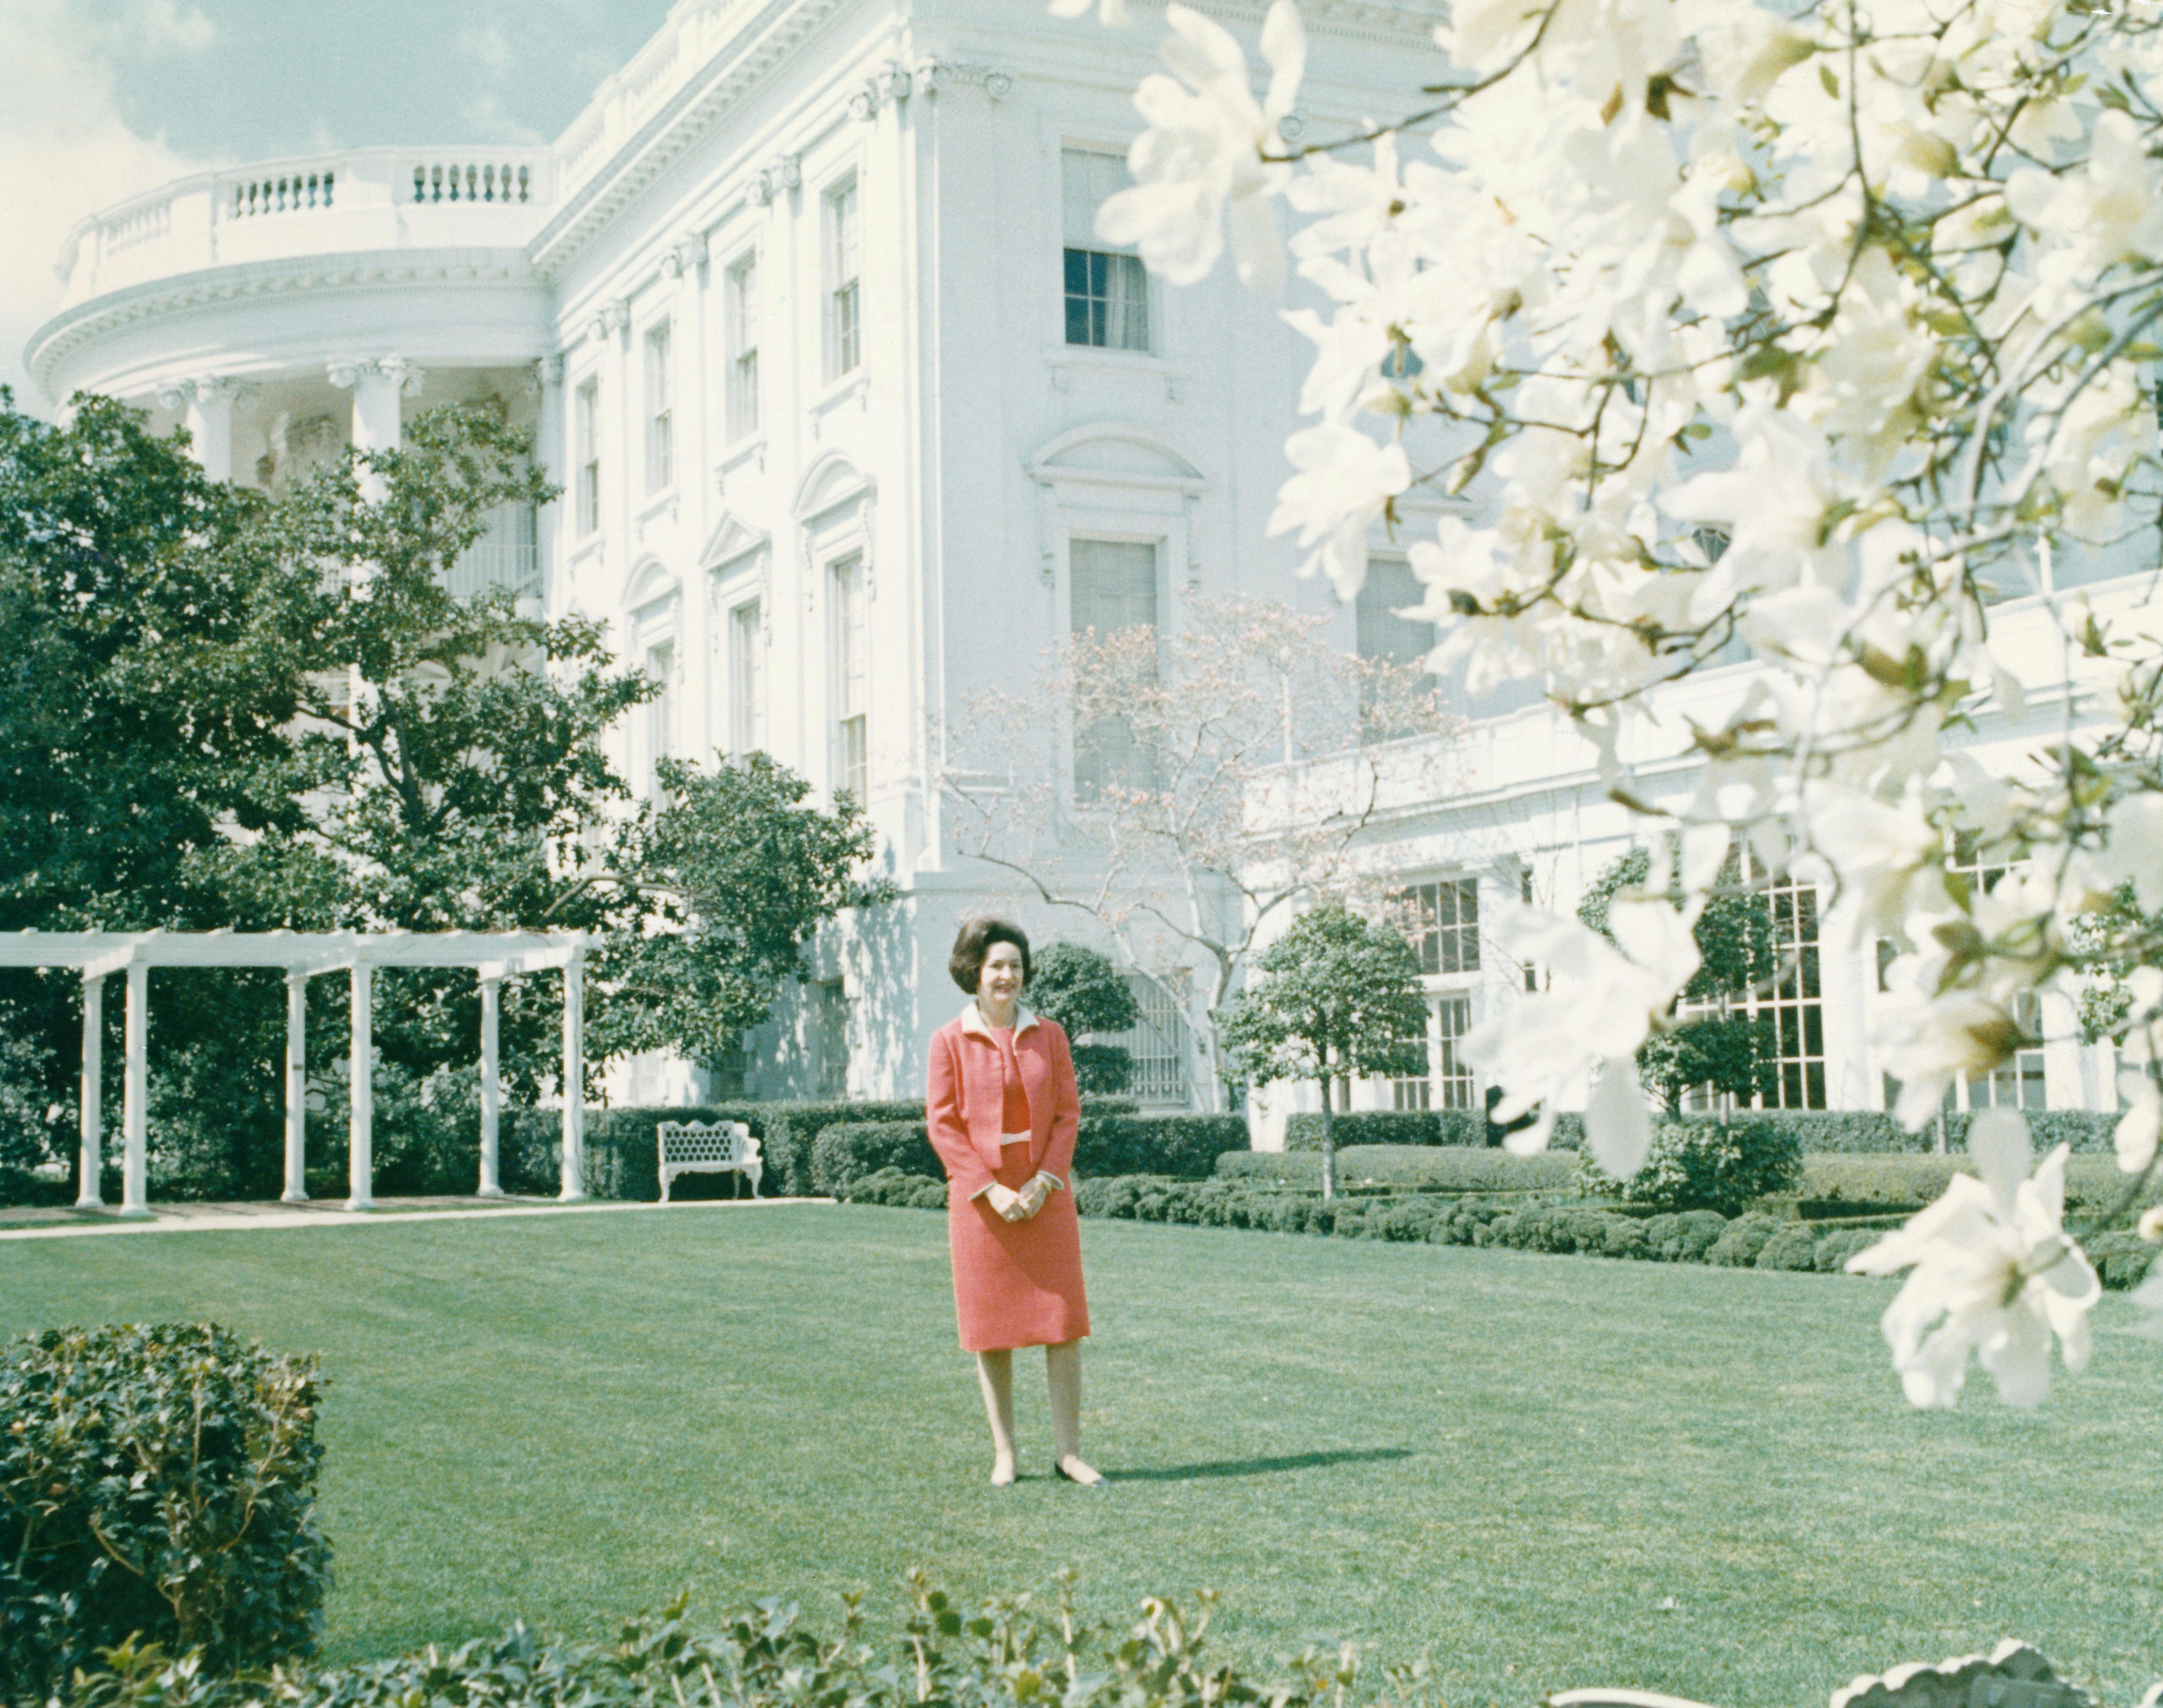 Unknown Portrait Photograph - Ladybird Johnson: FIrst Lady in The White House Lawn Globe Photos Fine Art Print